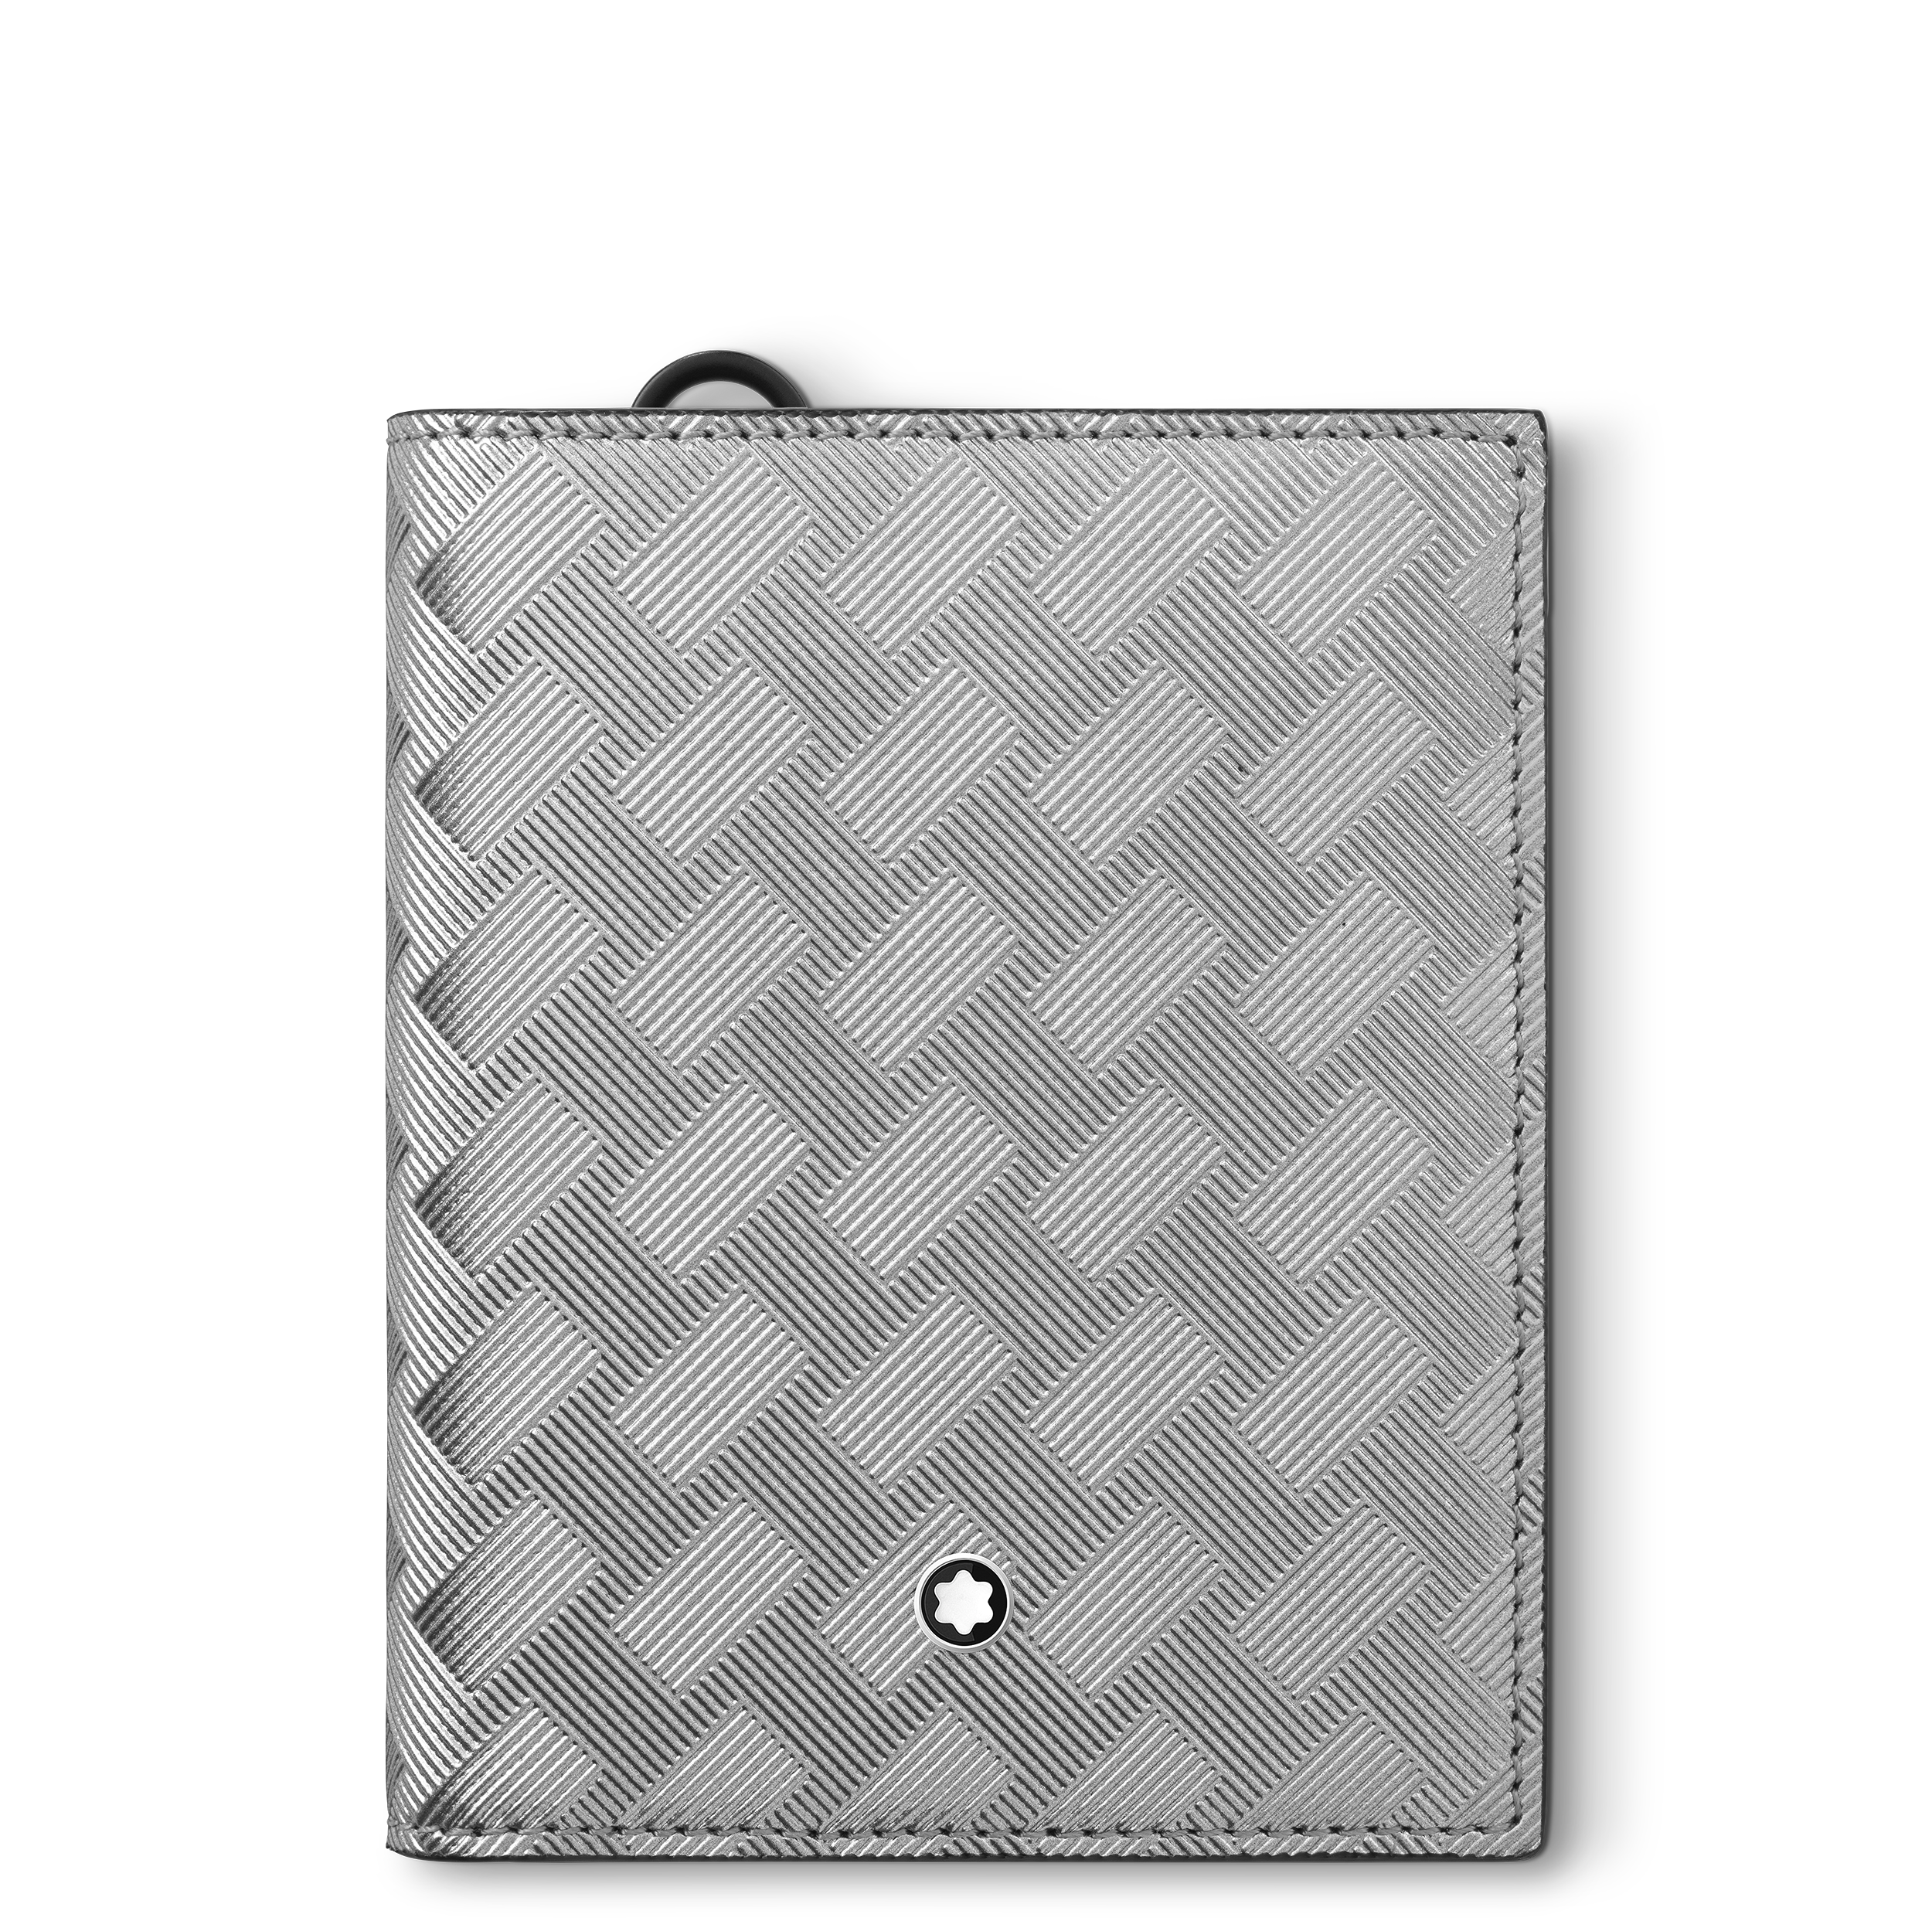 Montblanc Extreme 3.0 compact wallet 6cc, image 2